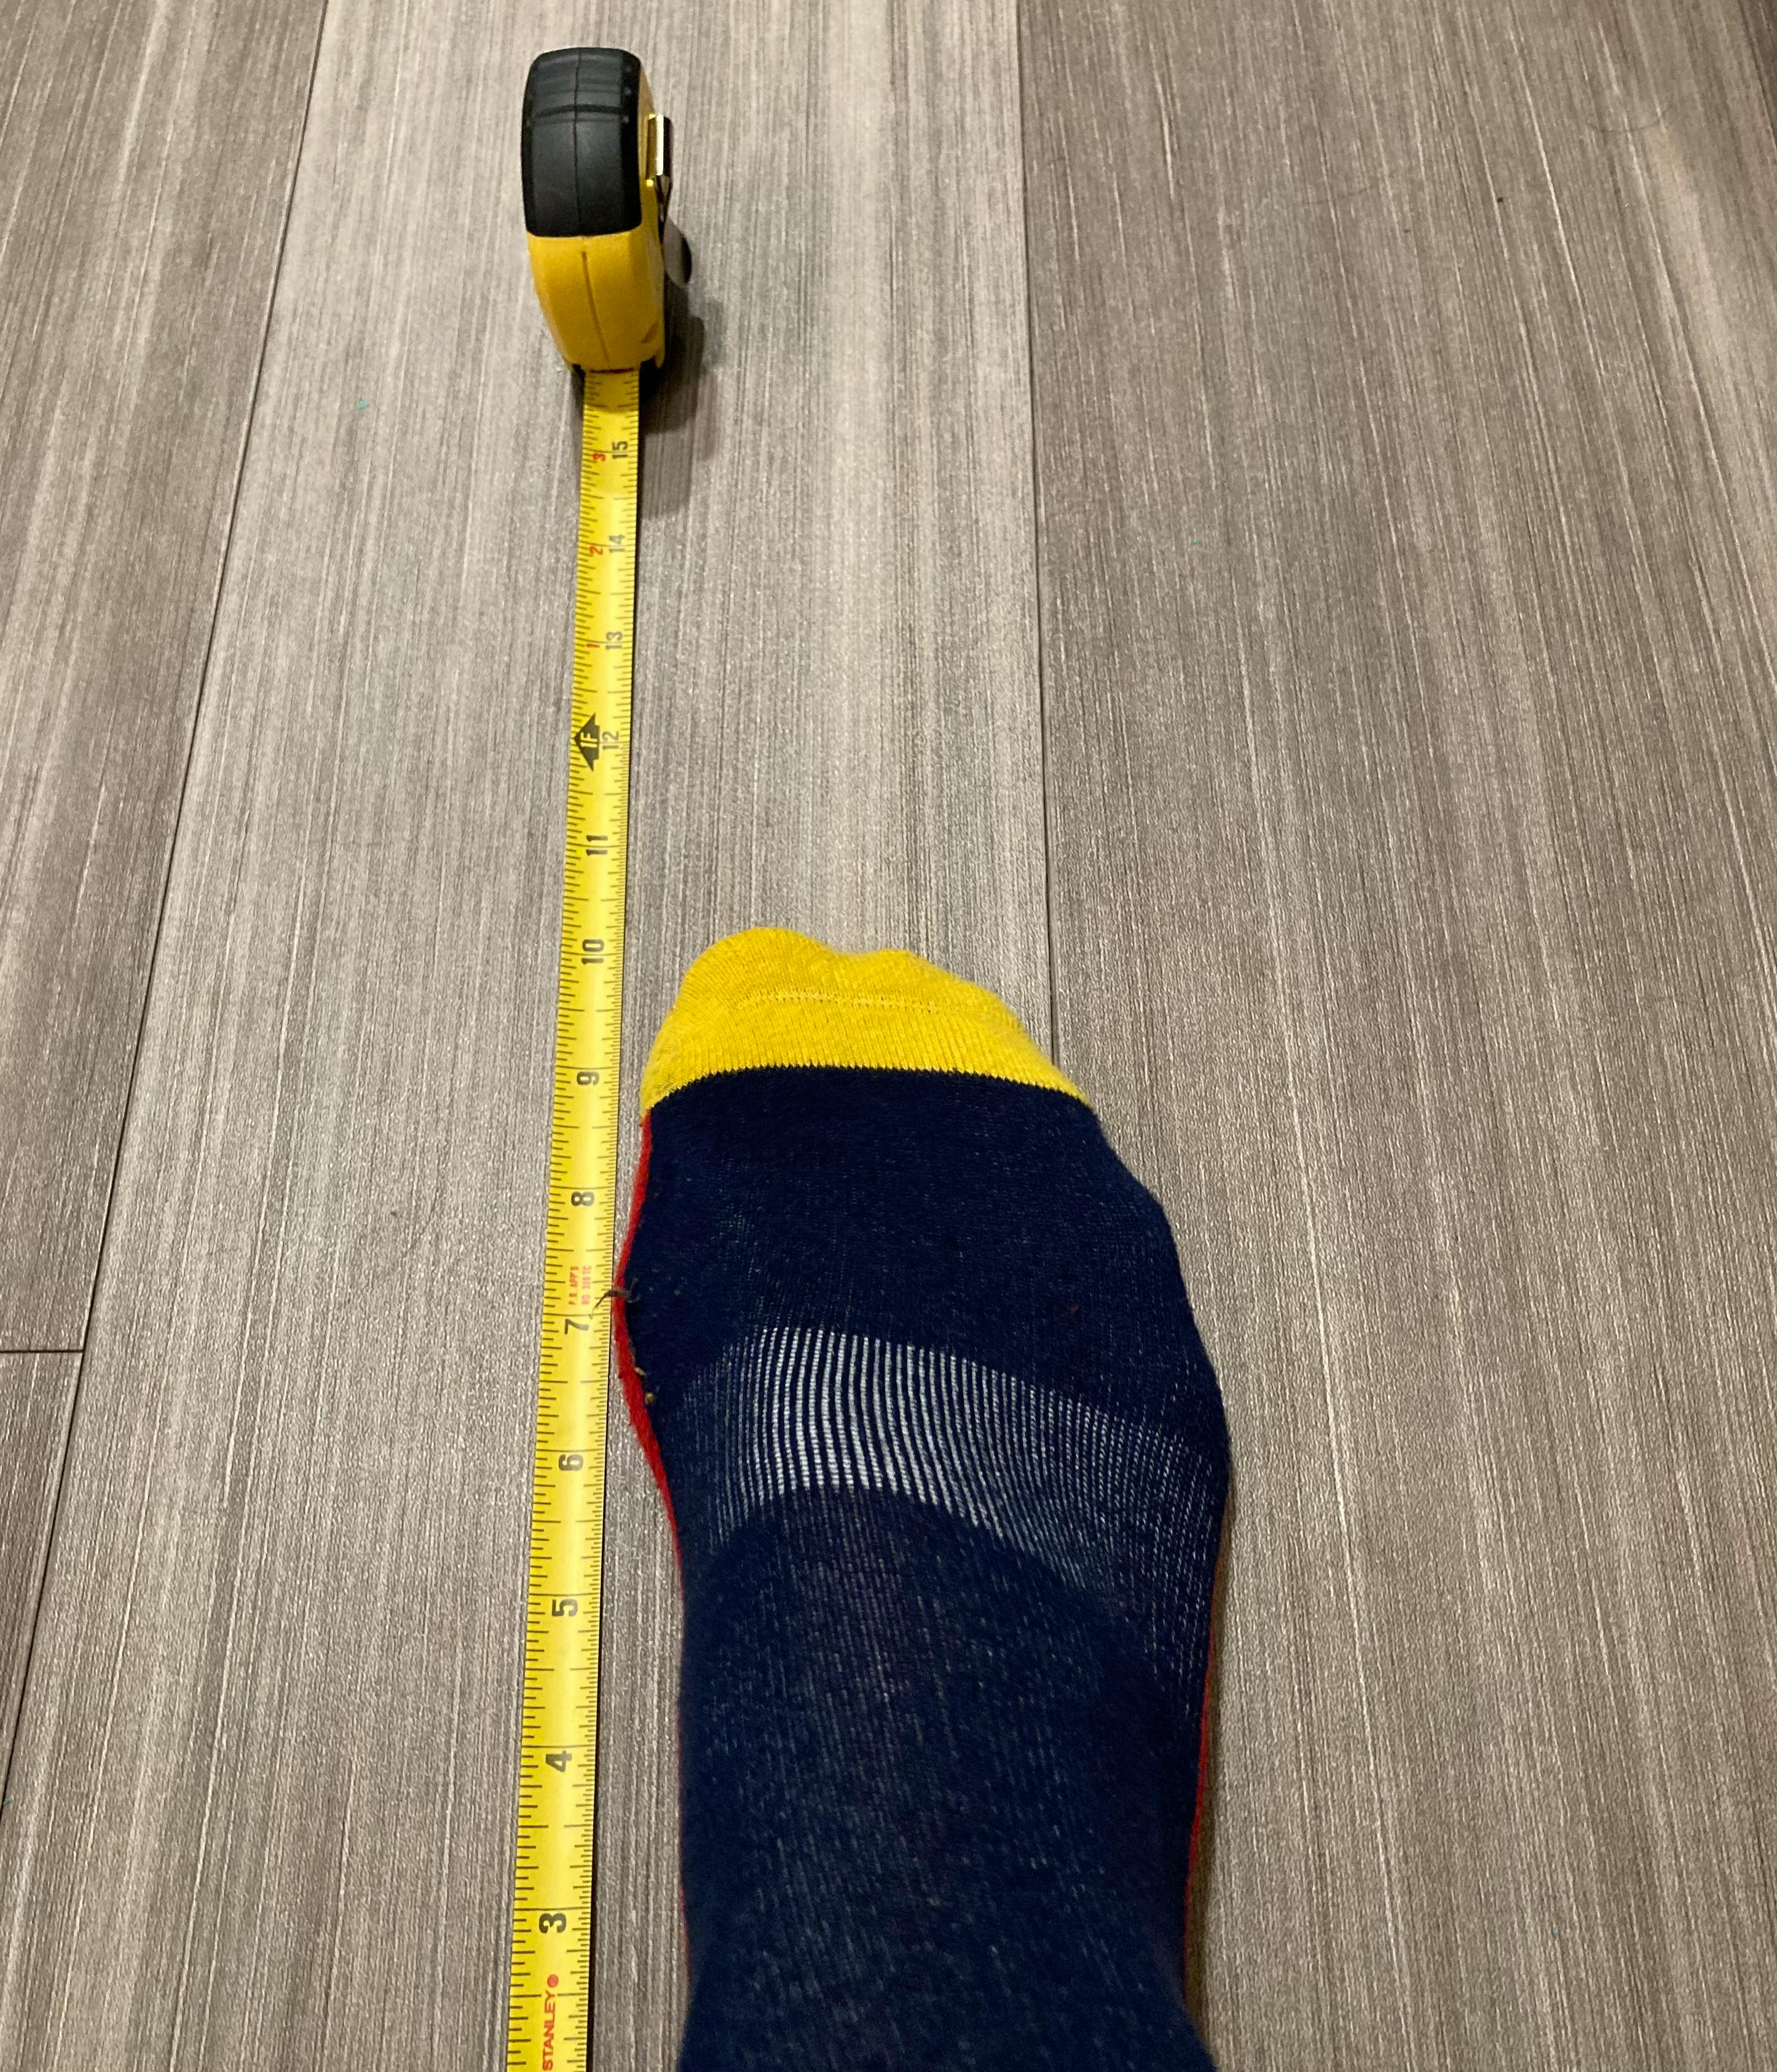 A socked foot lined up next to a spread out tape measure